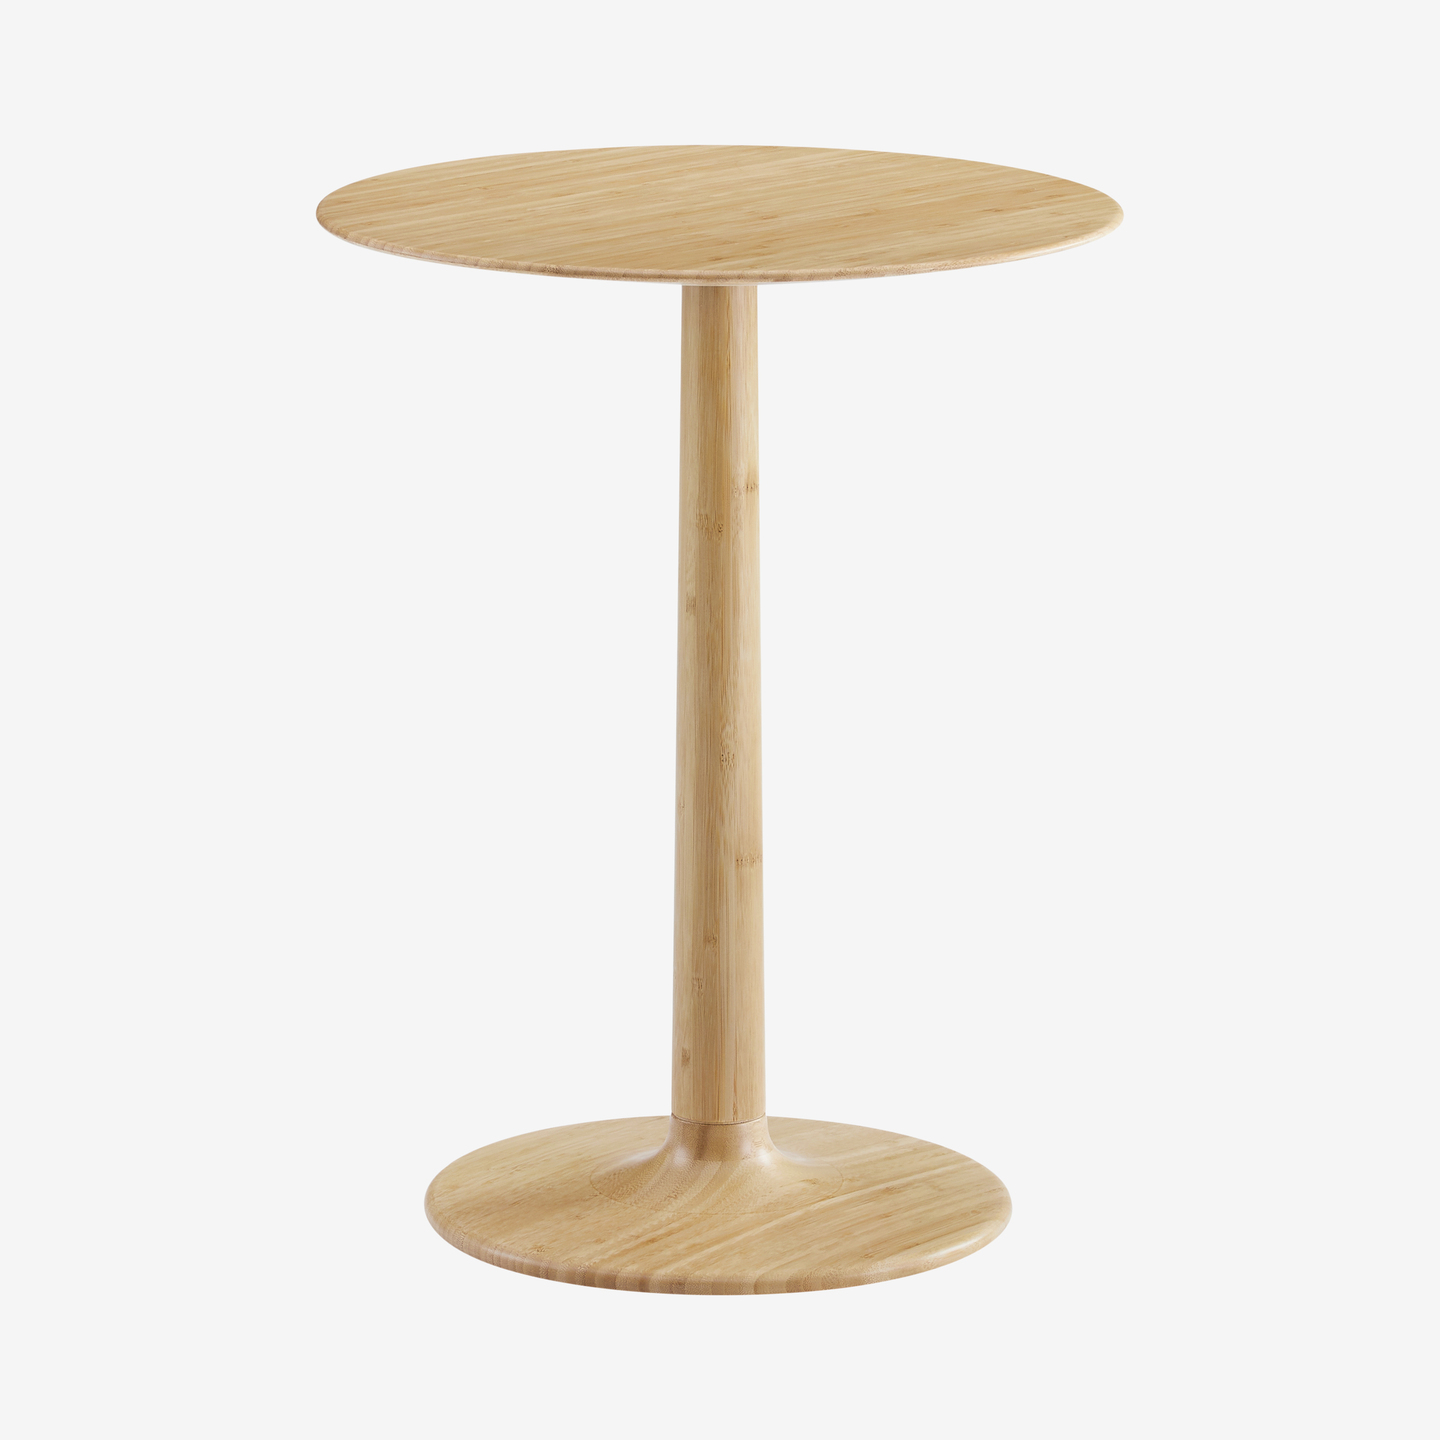 1837_Esme-Side-Table-Wheat_front